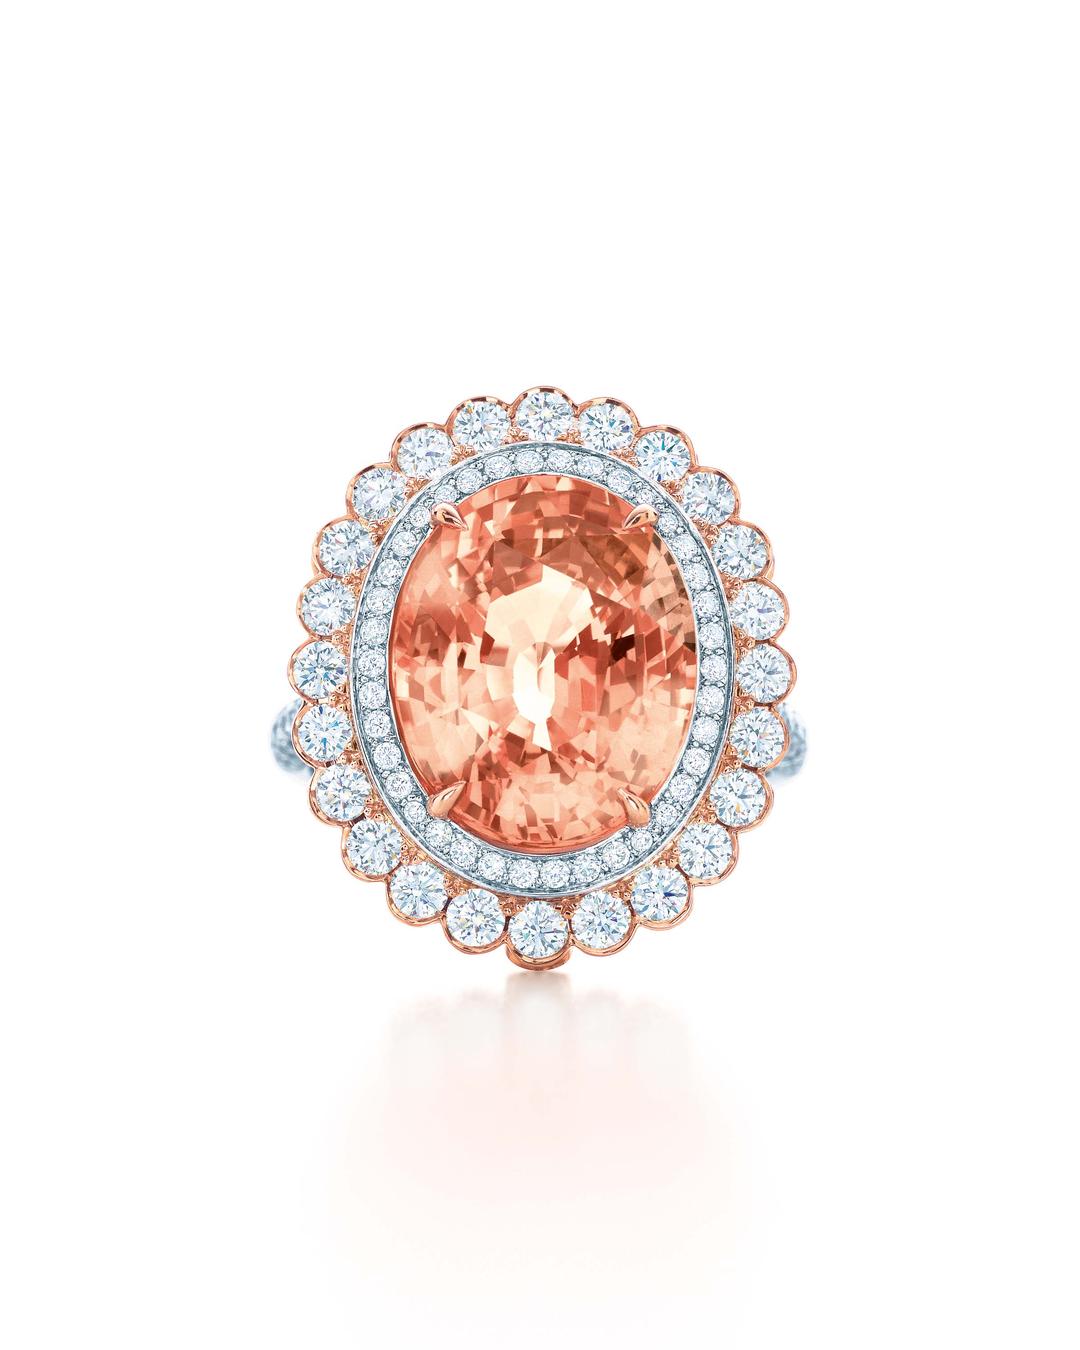 Tiffany & Co. Blue Book Collection padparadscha sapphire